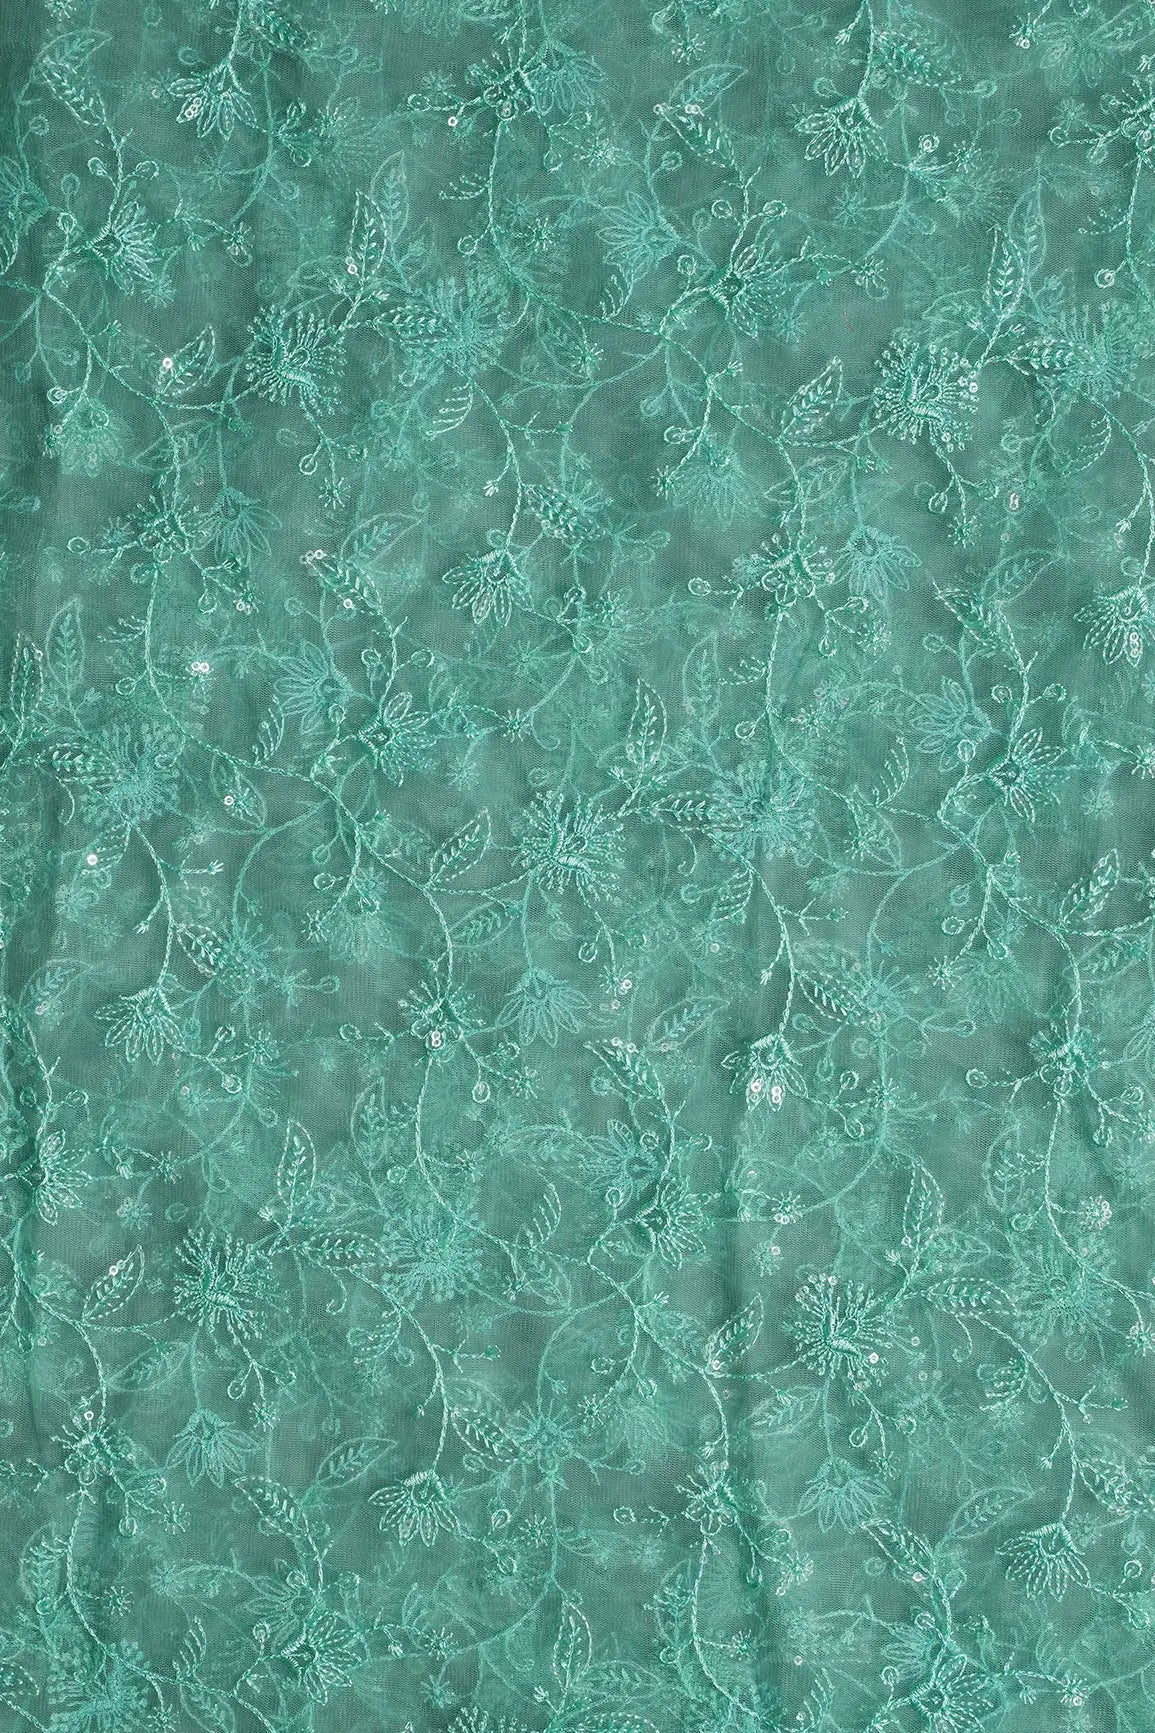 Teal Thread With Water Sequins Floral Embroidery On Teal Soft Net Fabric - doeraa